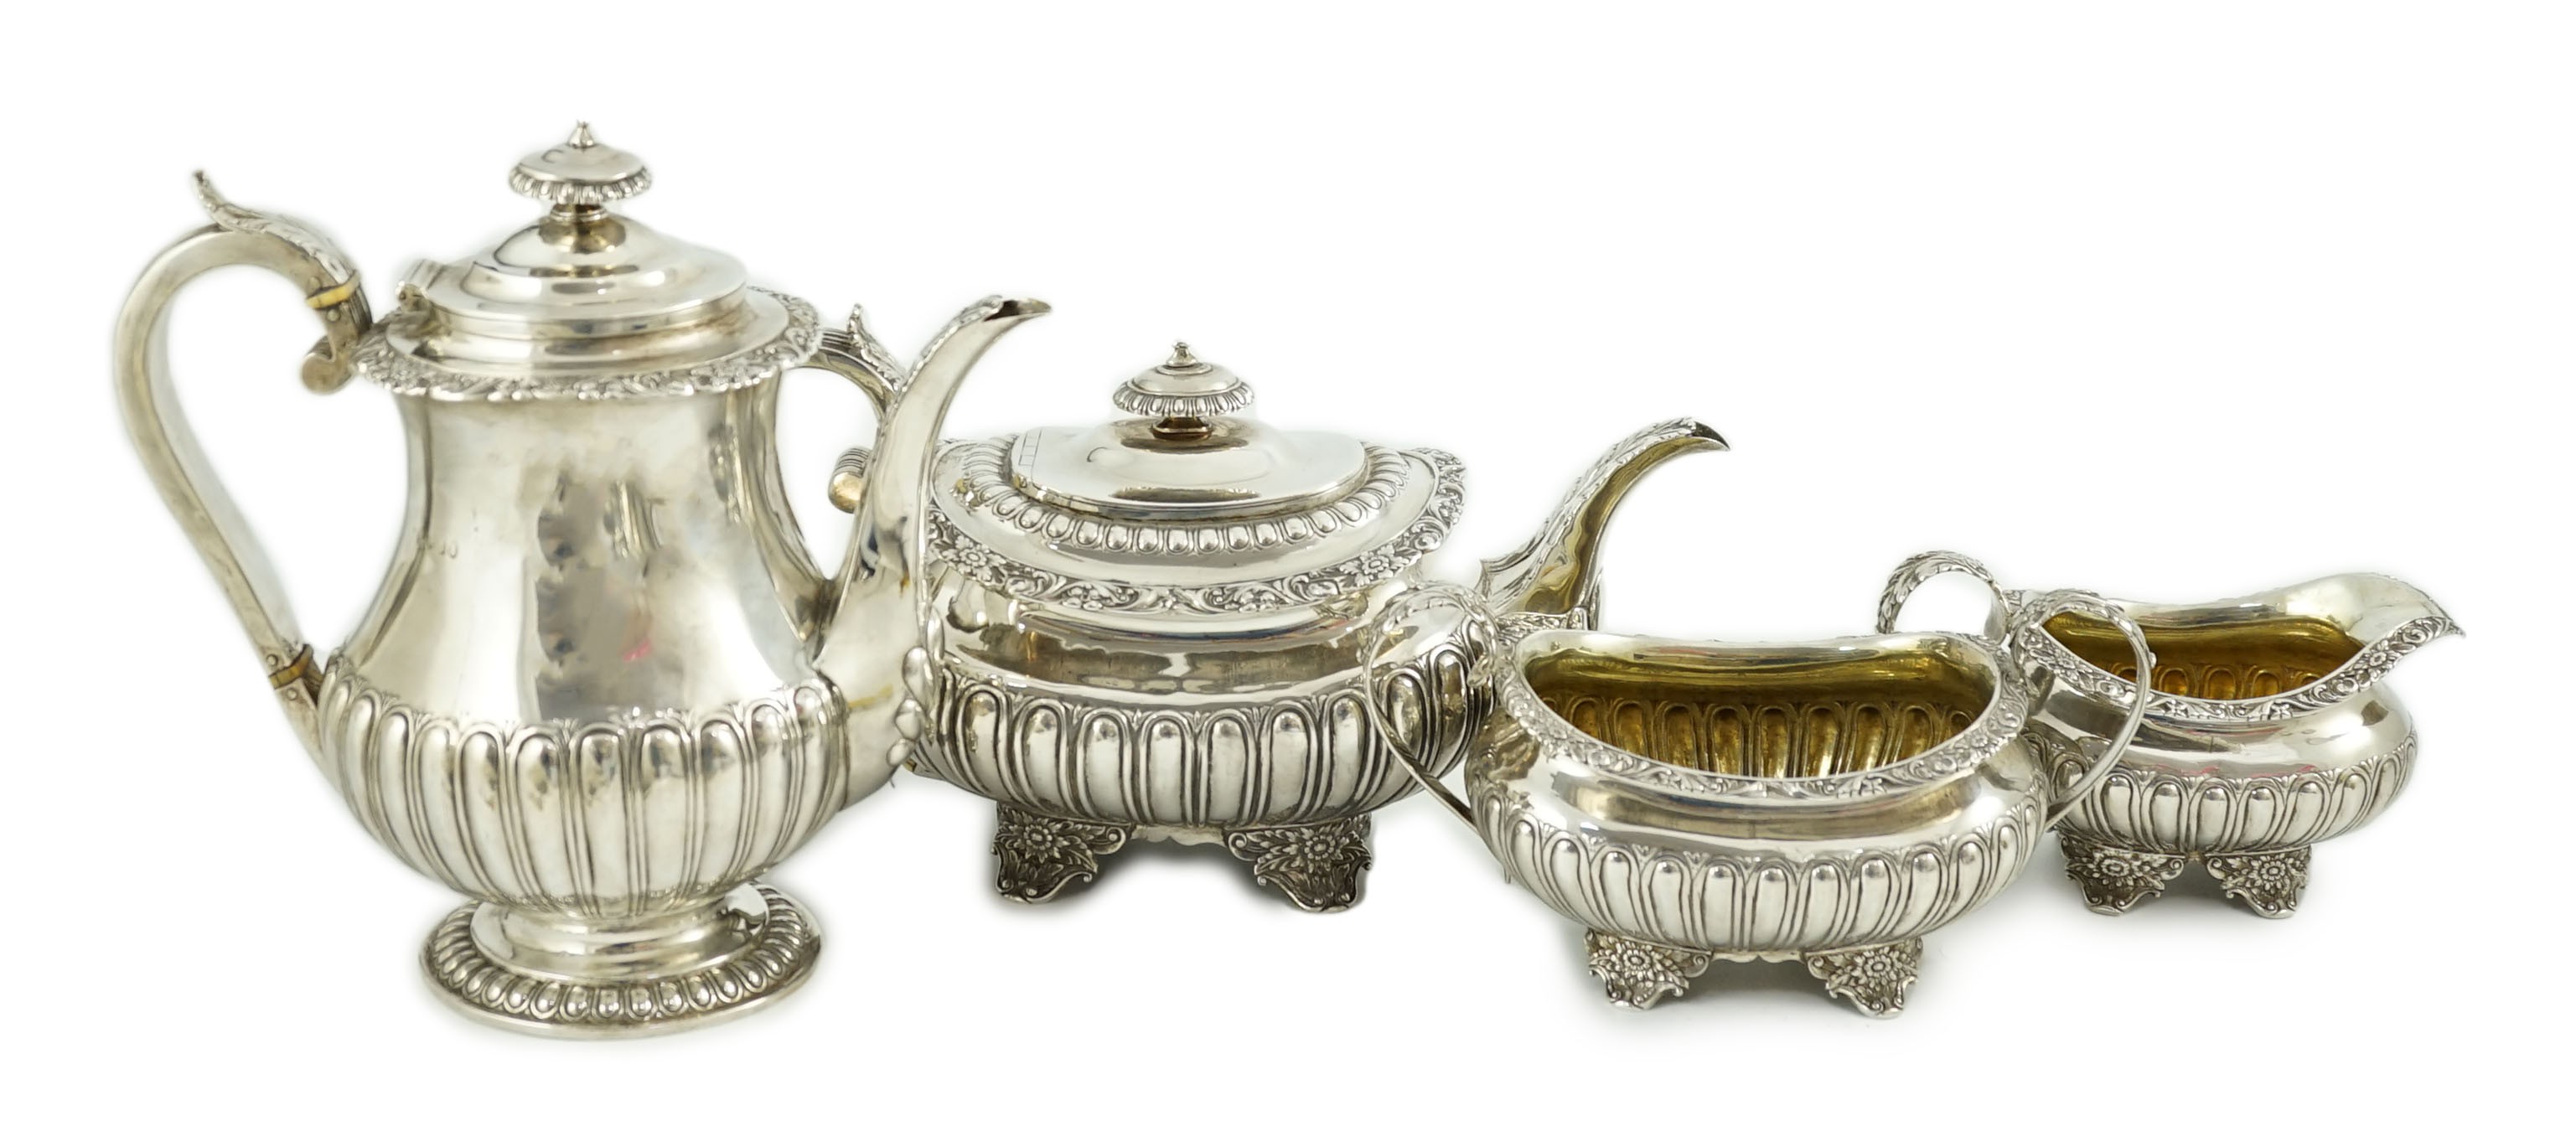 A George IV four piece demi fluted silver tea and coffee service, by Joseph Angell I